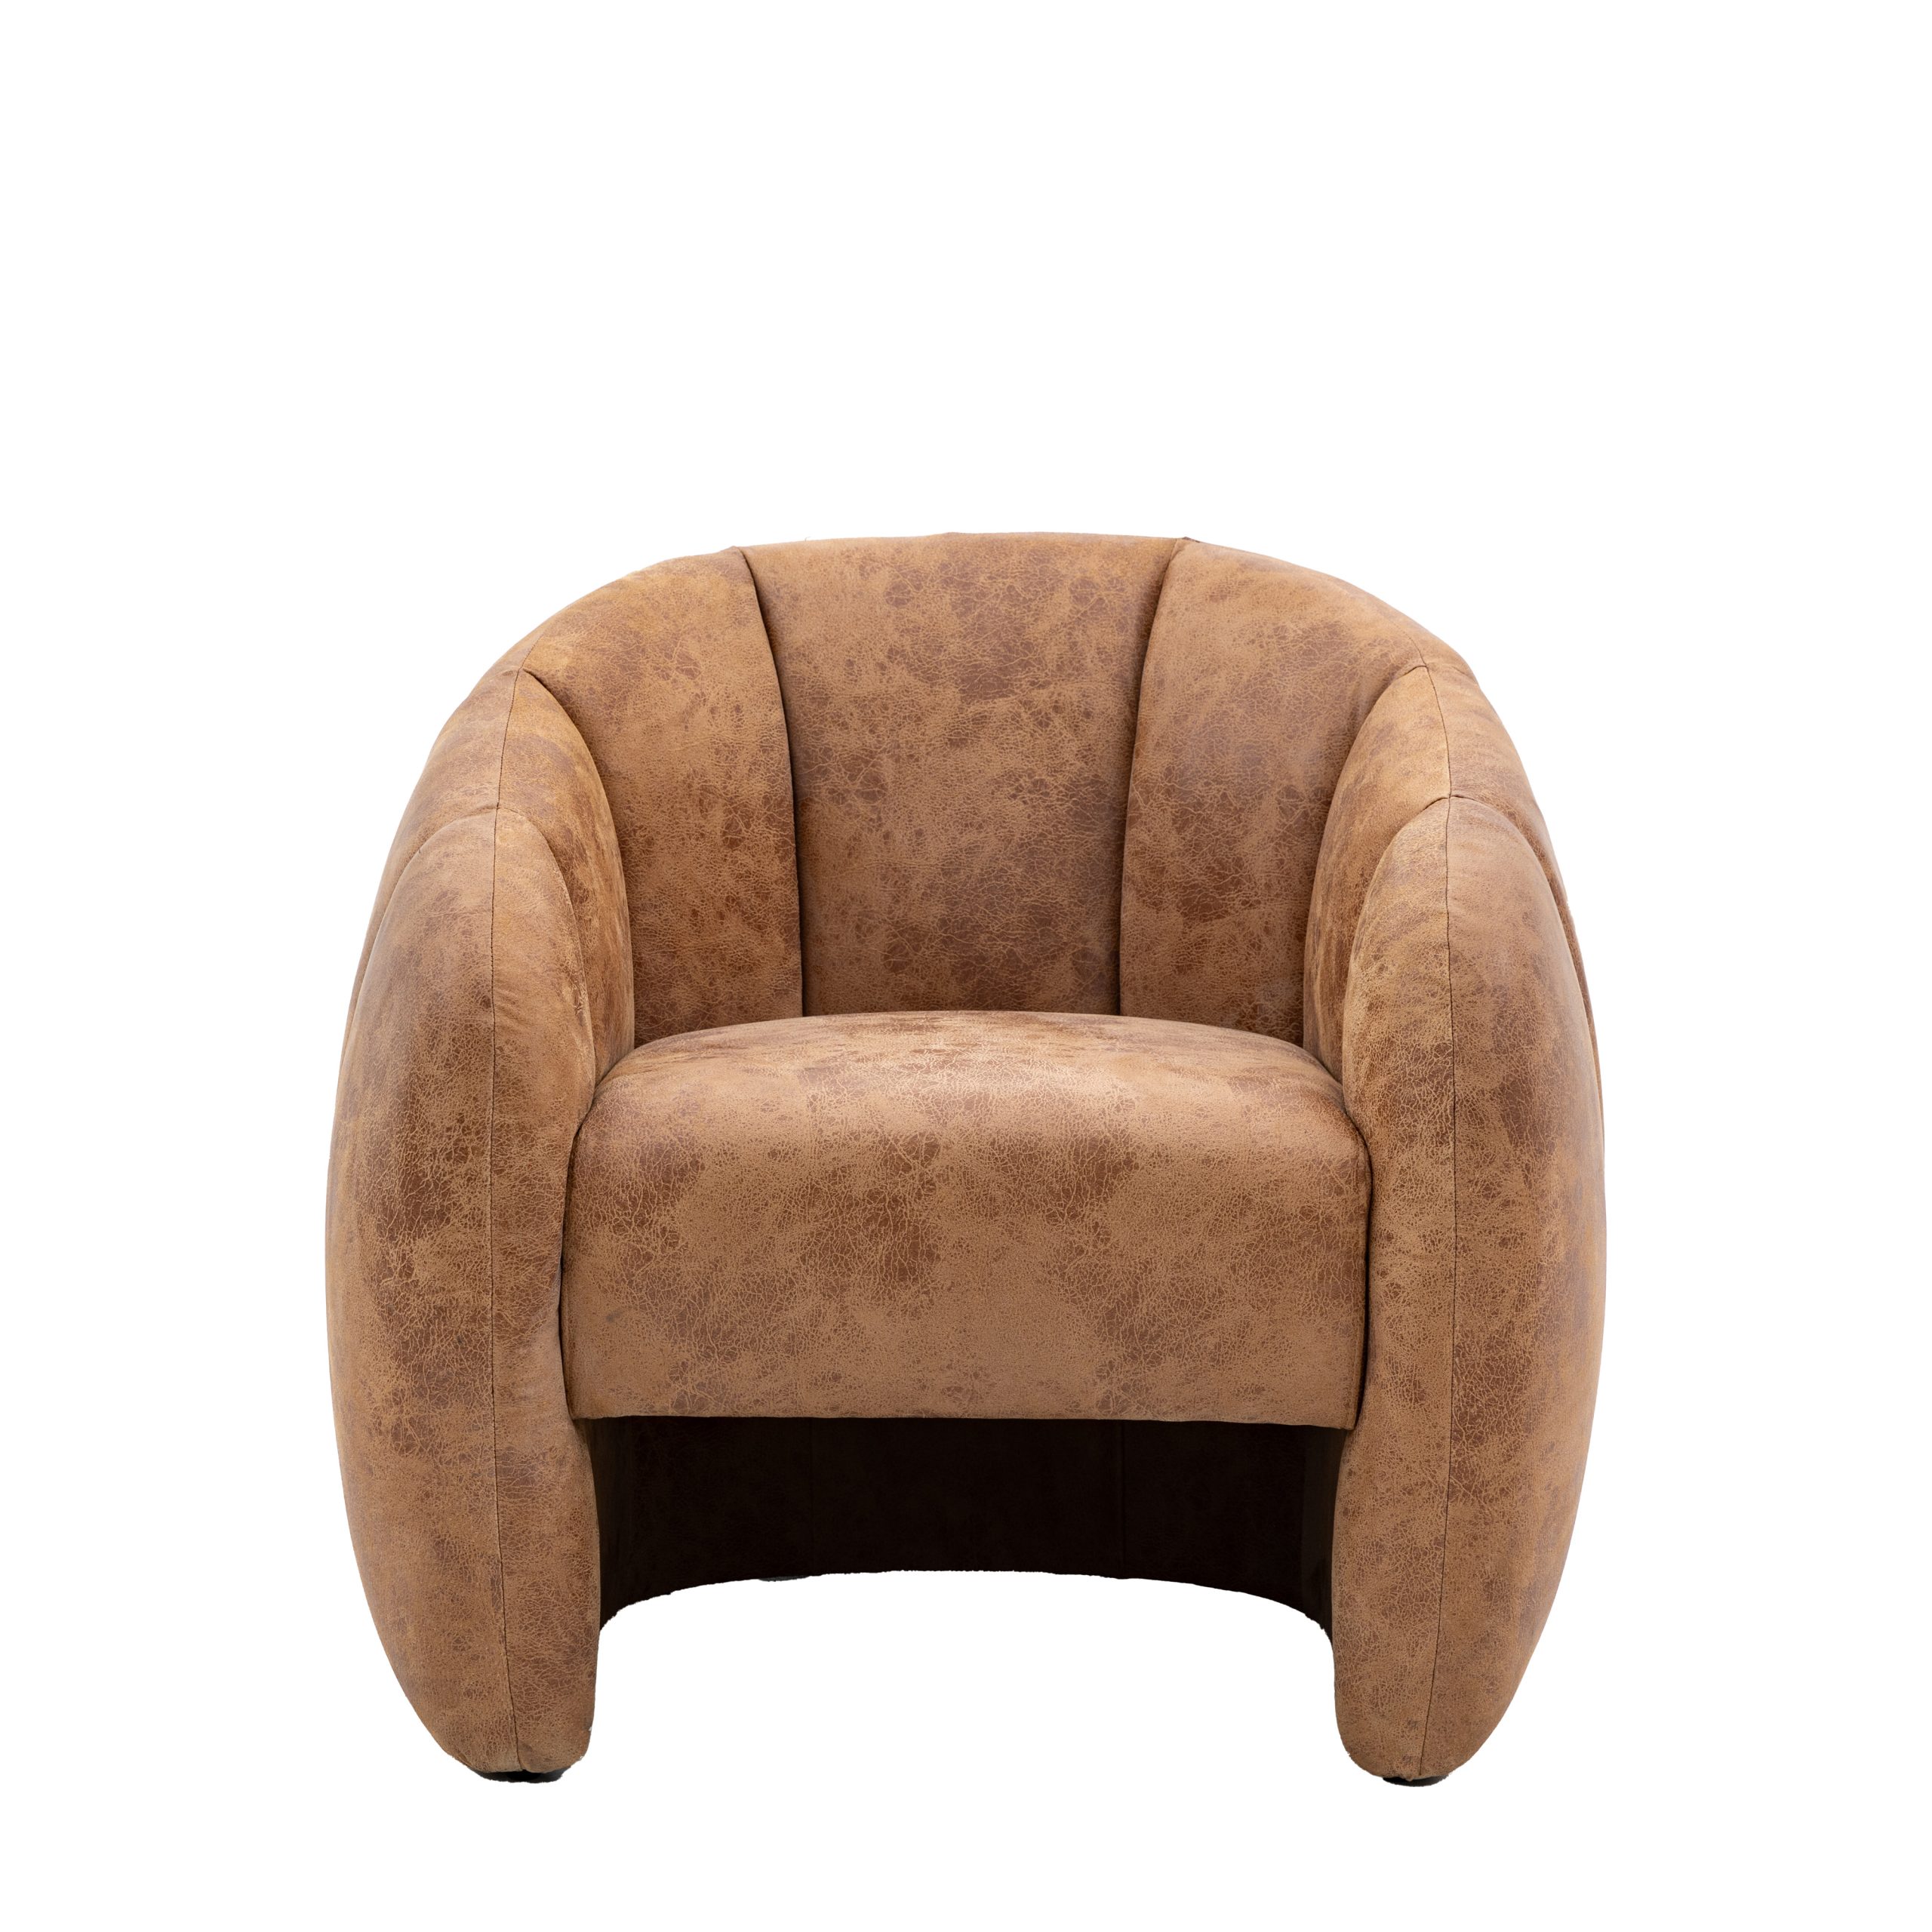 Gallery Direct Atella Tub Chair Antique Tan Leather